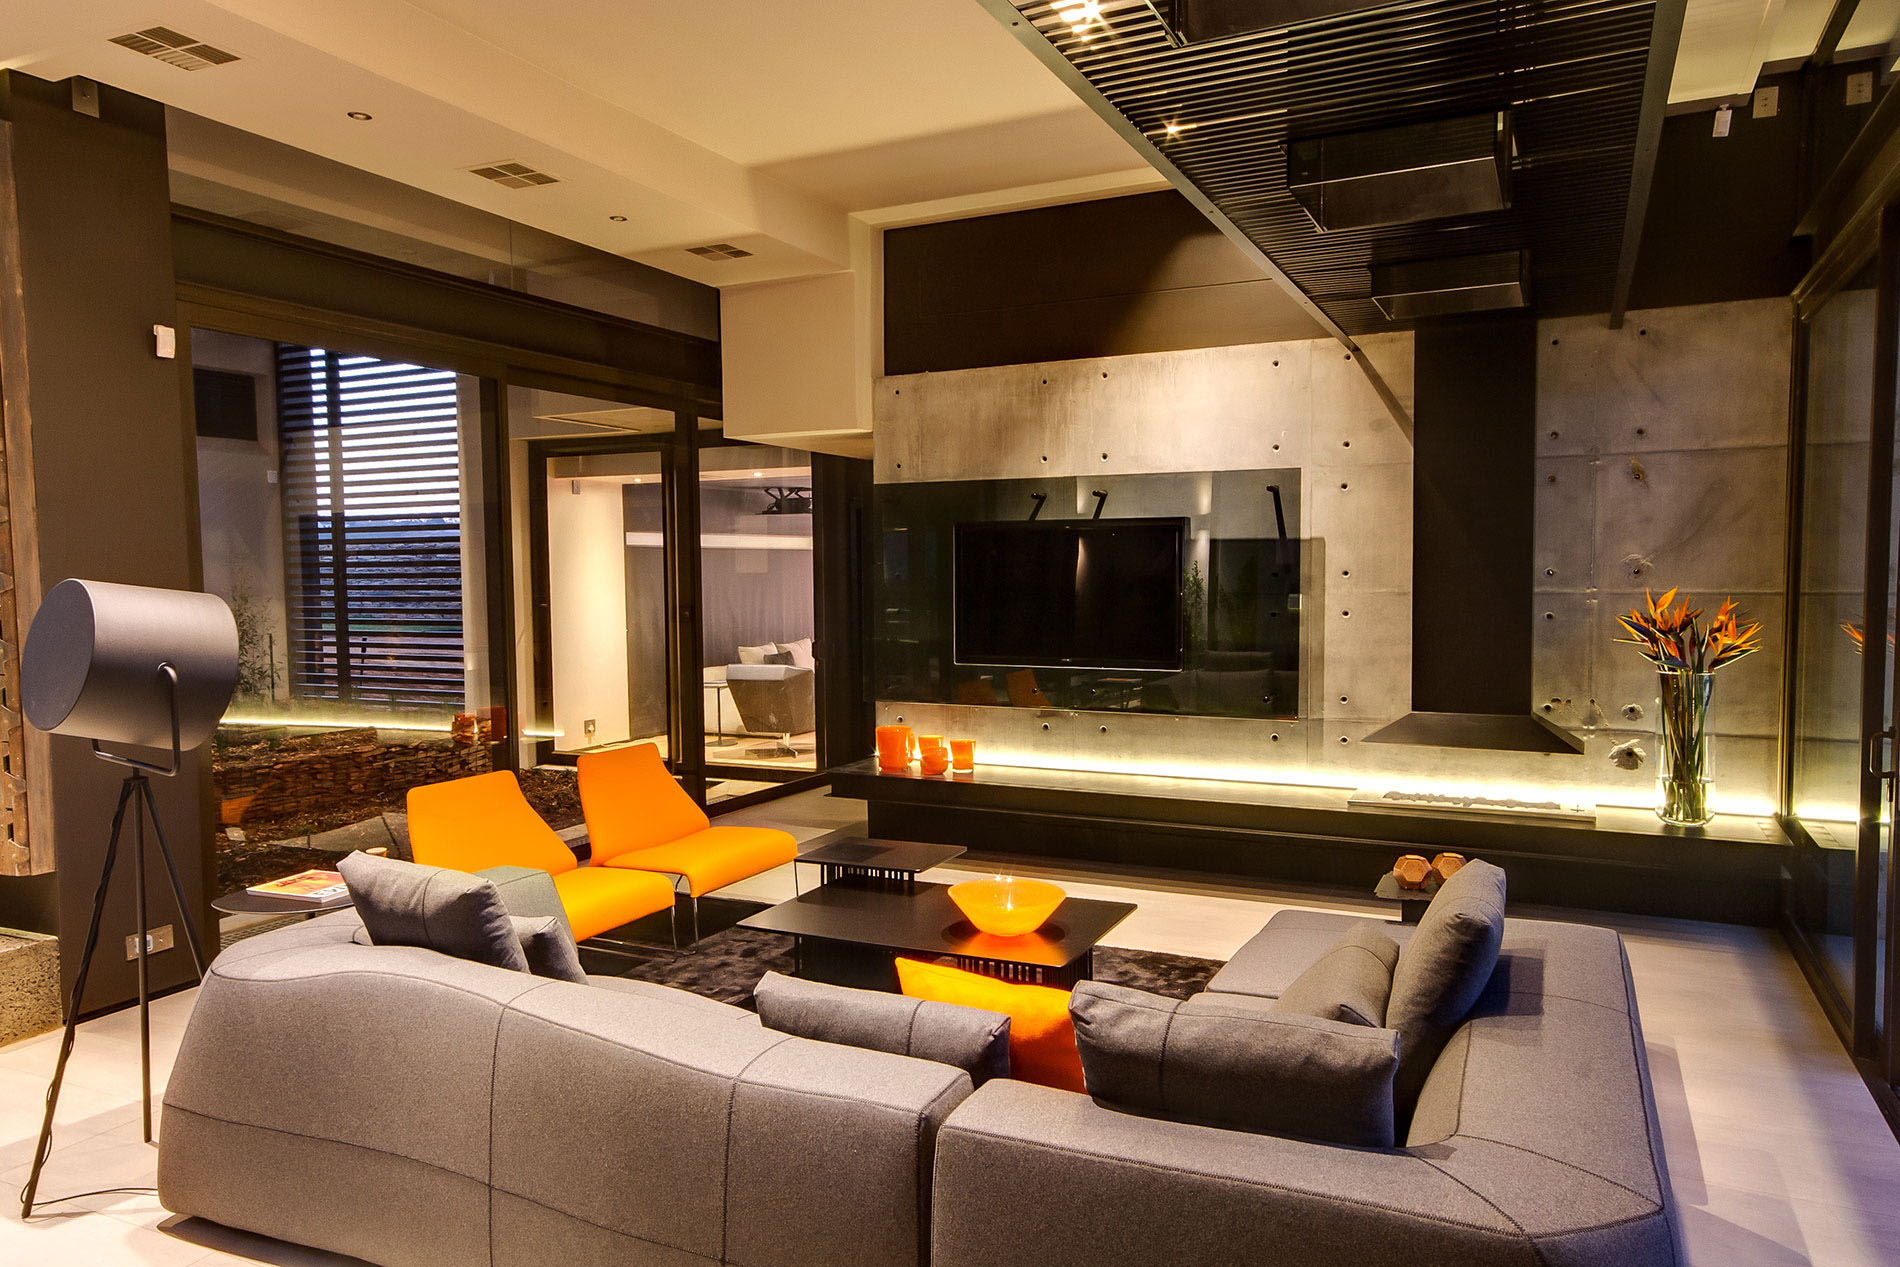 Living Room Of Captivating Living Room Space Design Of House Boz By Nico Van Der Meulen Architects With Wide Black LCD Television Dream Homes Spacious And Concrete Contemporary House With Glass And Steel Elements